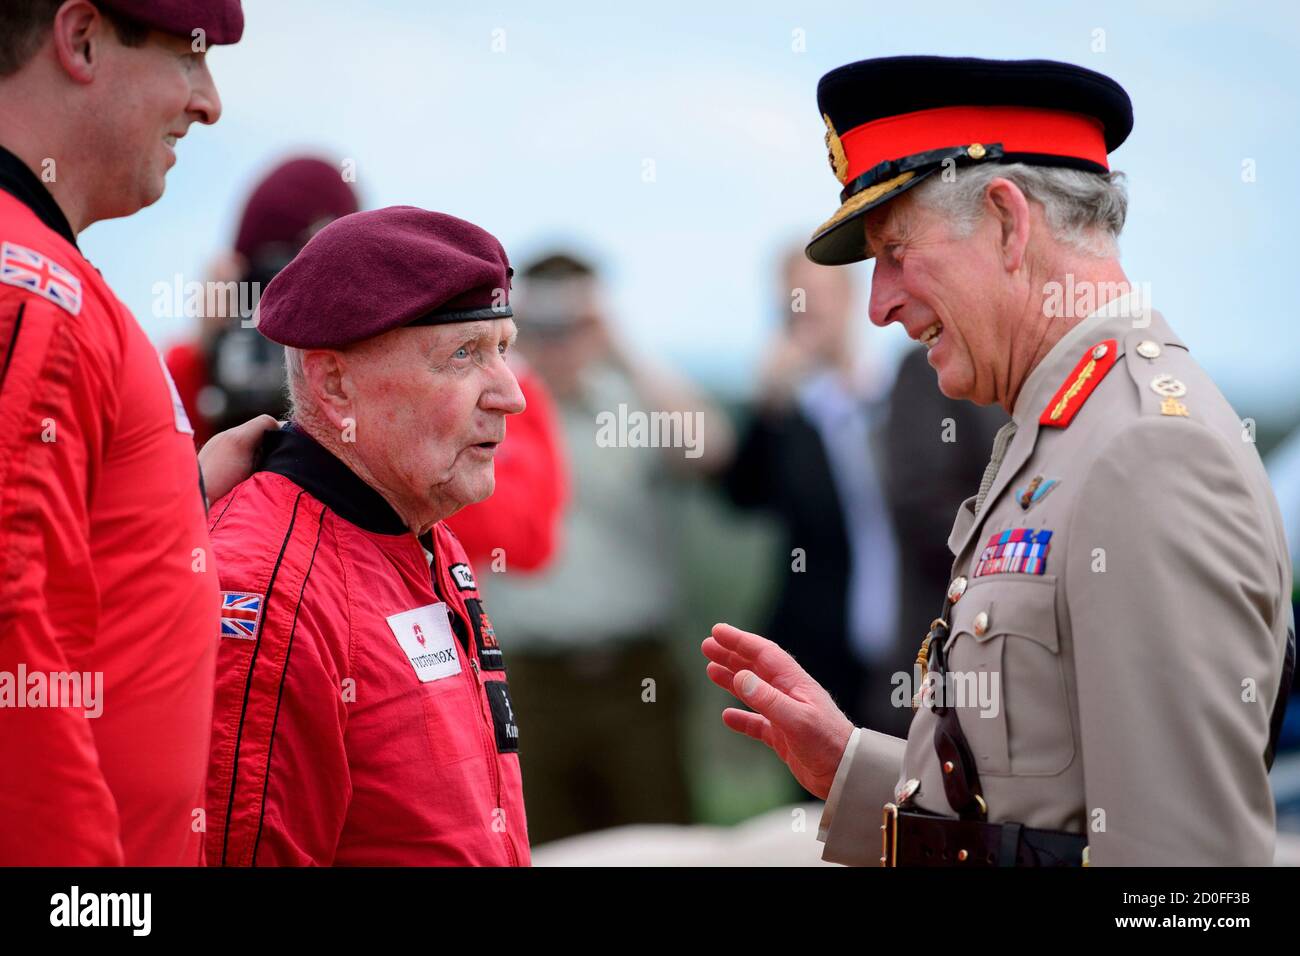 Britain's Prince Charles (R), Prince of Wales, speaks with British World War II veteran Jock Hutton (L), 89, after Hutton and teams of French, US, Canadian and British paratroopers jumped from aeroplanes during a D-Day commemoration in Ranville, northern France, on June 5, 2014. Some 3,000 veterans are among those attending ceremonies across the Normandy coastline where Allied forces landed in the largest seaborne invasion in history seventy years ago to help speed up the defeat of Nazi Germany in the Second World War.  REUTERS/Leon Neal/Pool   (FRANCE - Tags: ANNIVERSARY CONFLICT ROYALS ENTER Stock Photo